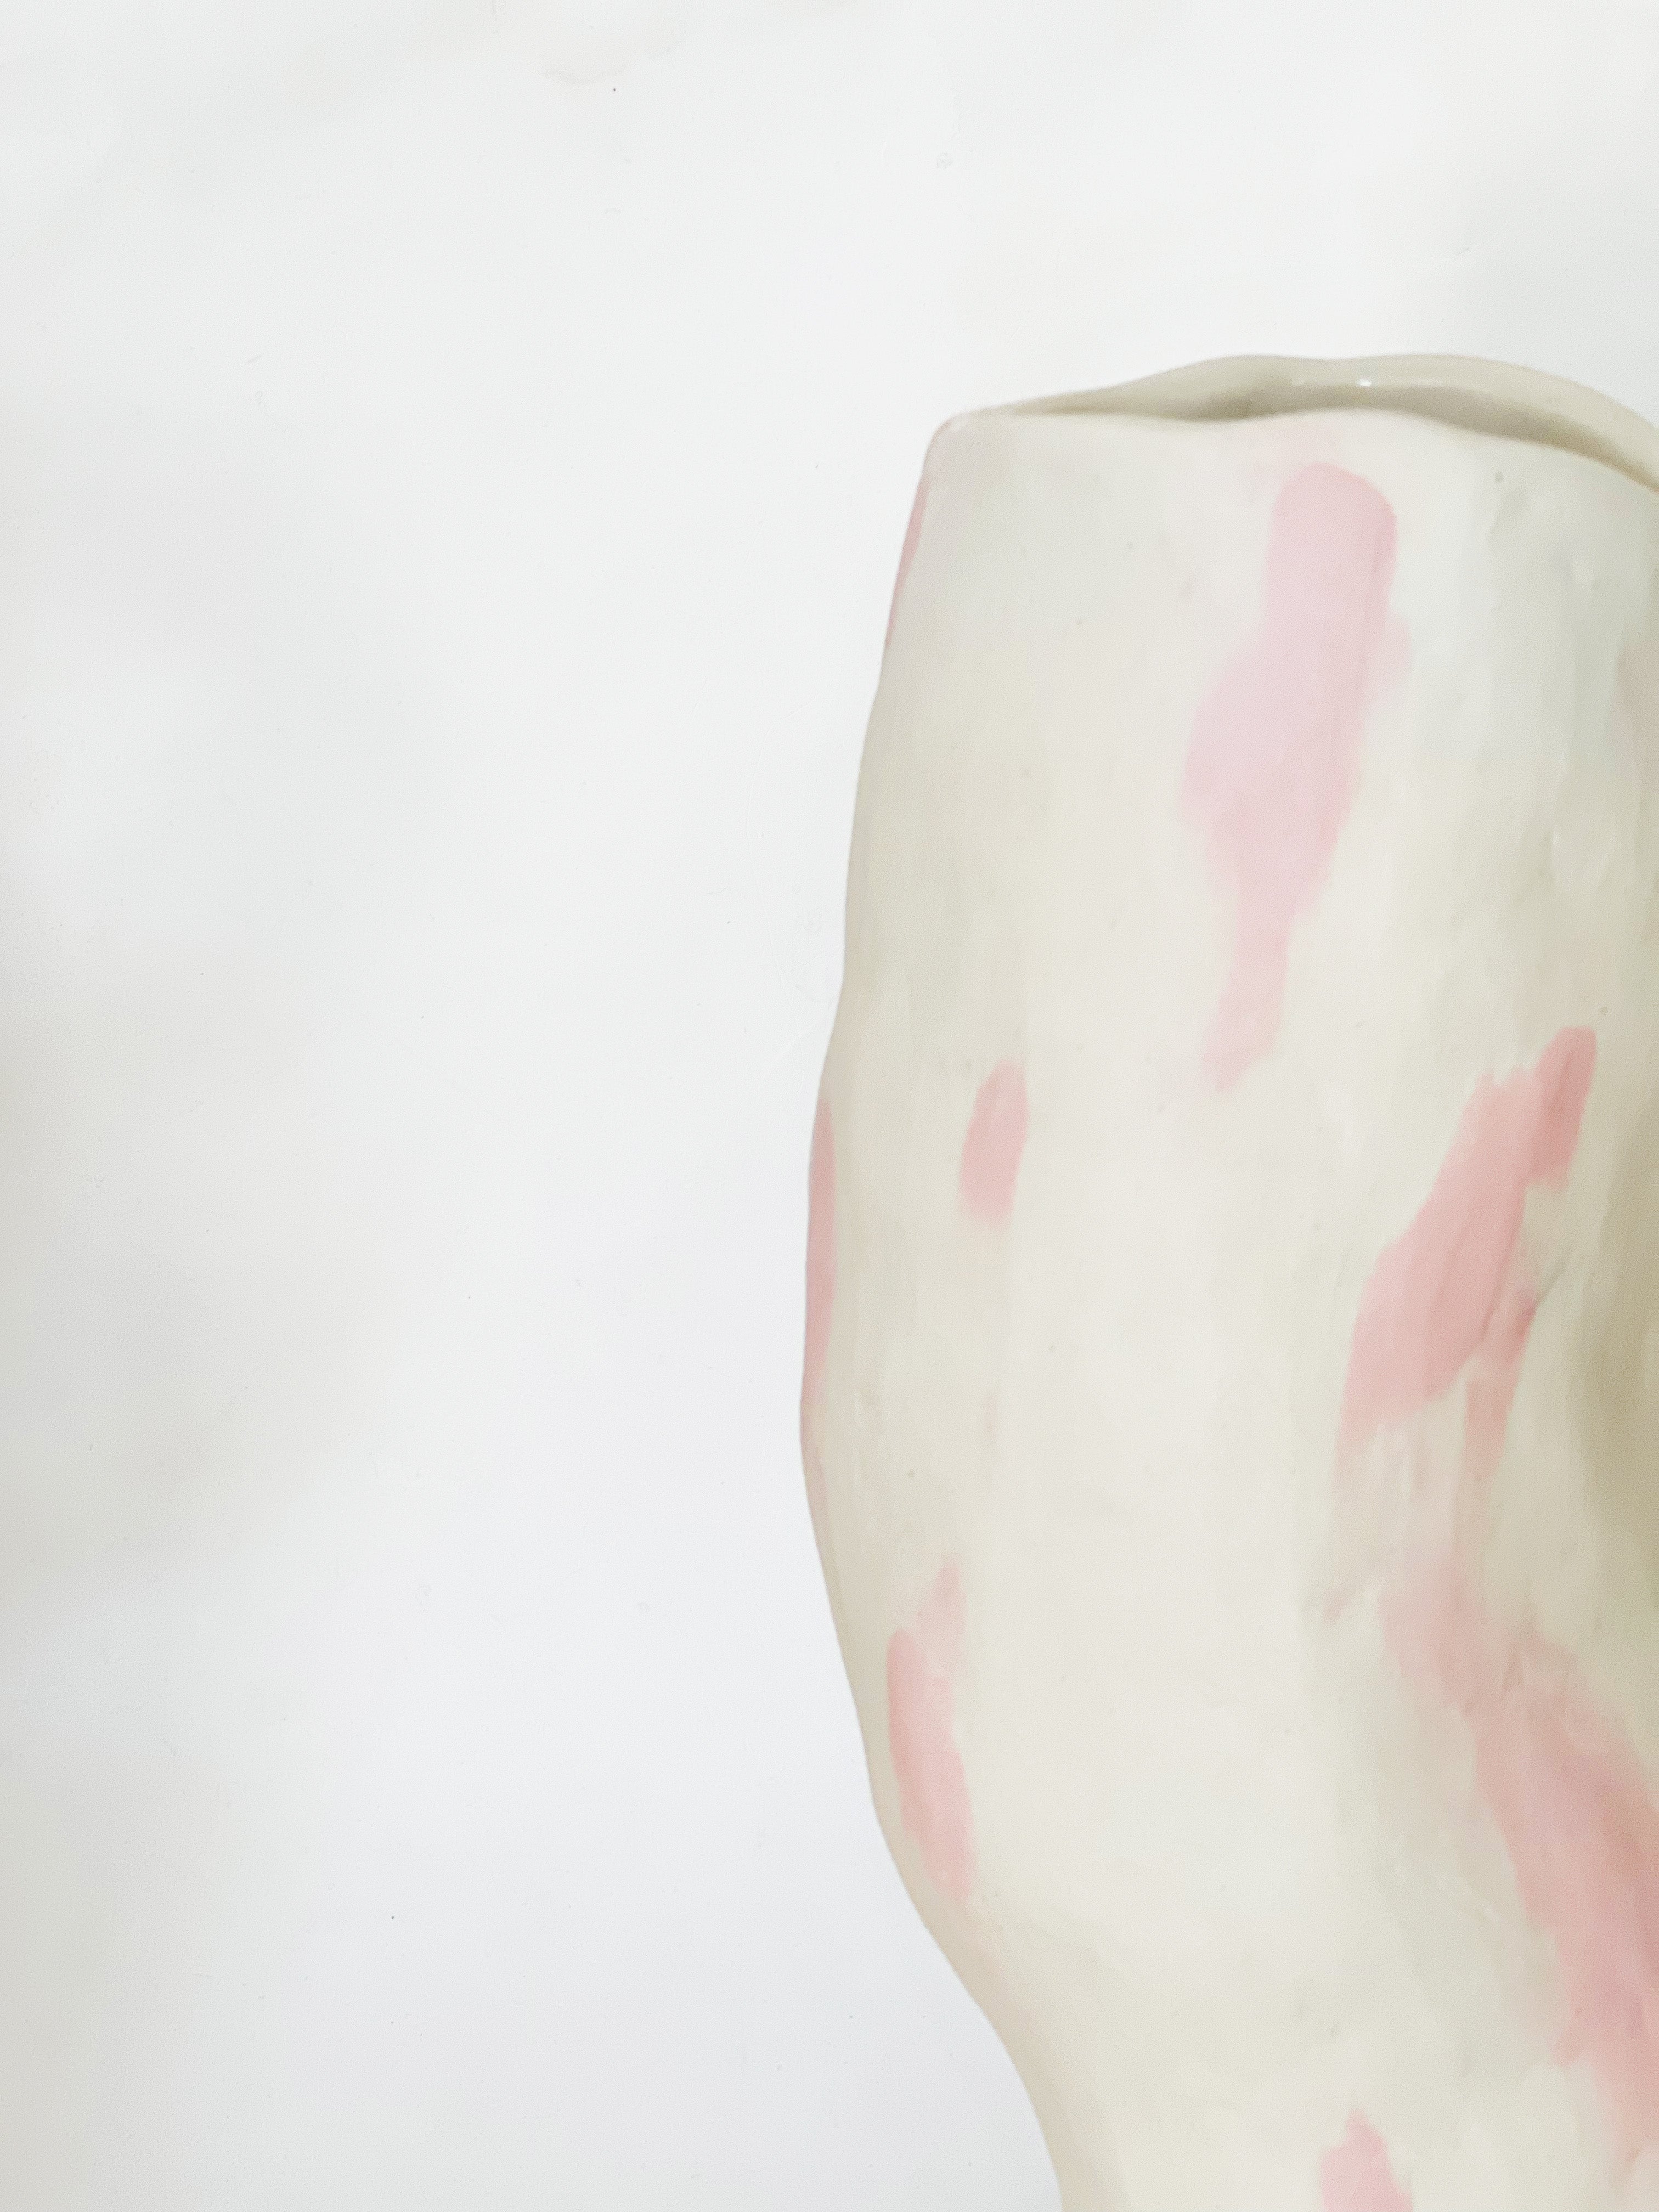 Ready to ship: Pink on Cream Flow Vase